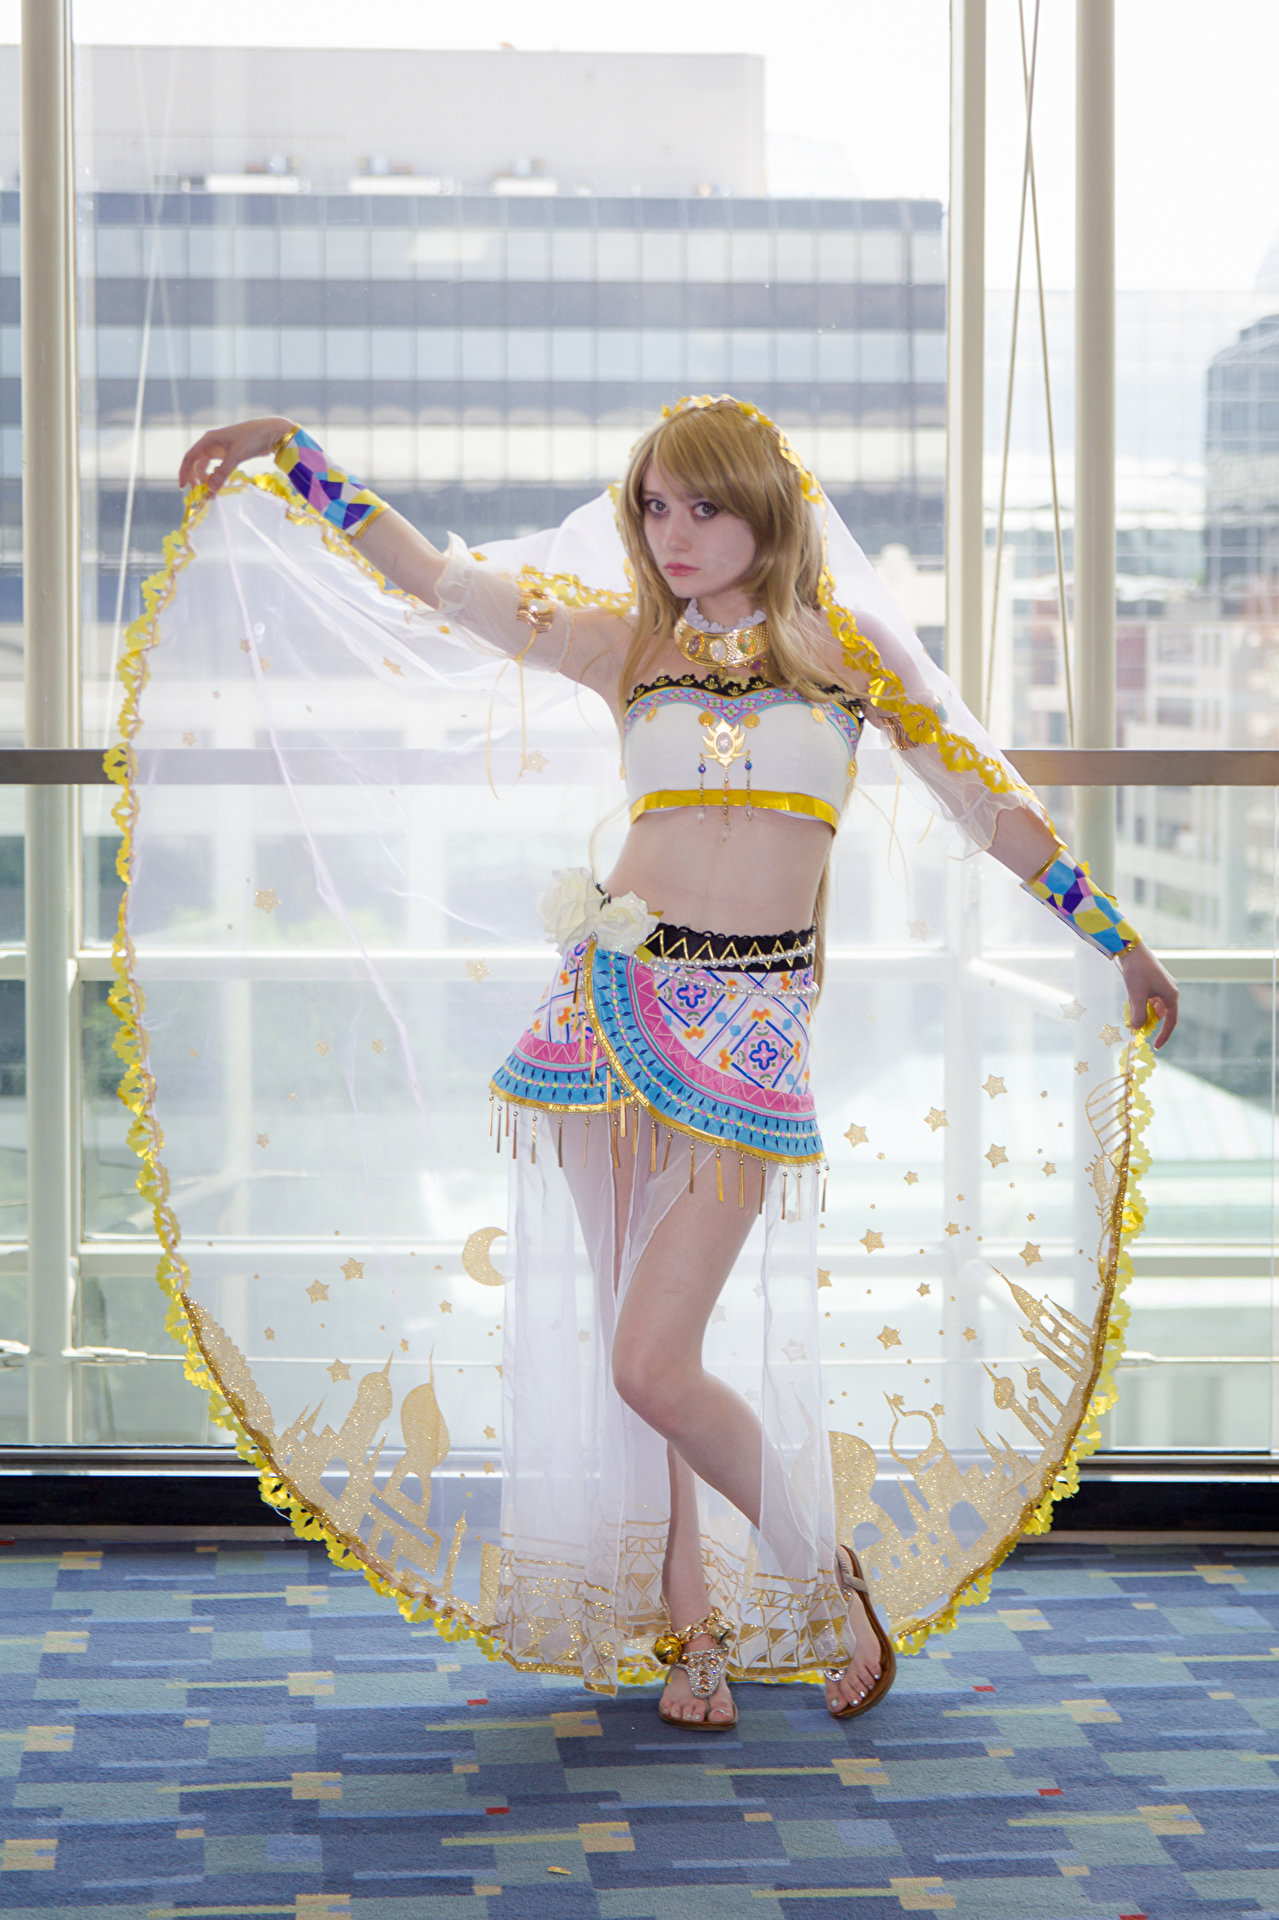 Cospix.net photo featuring Wings of a Dream Cosplay